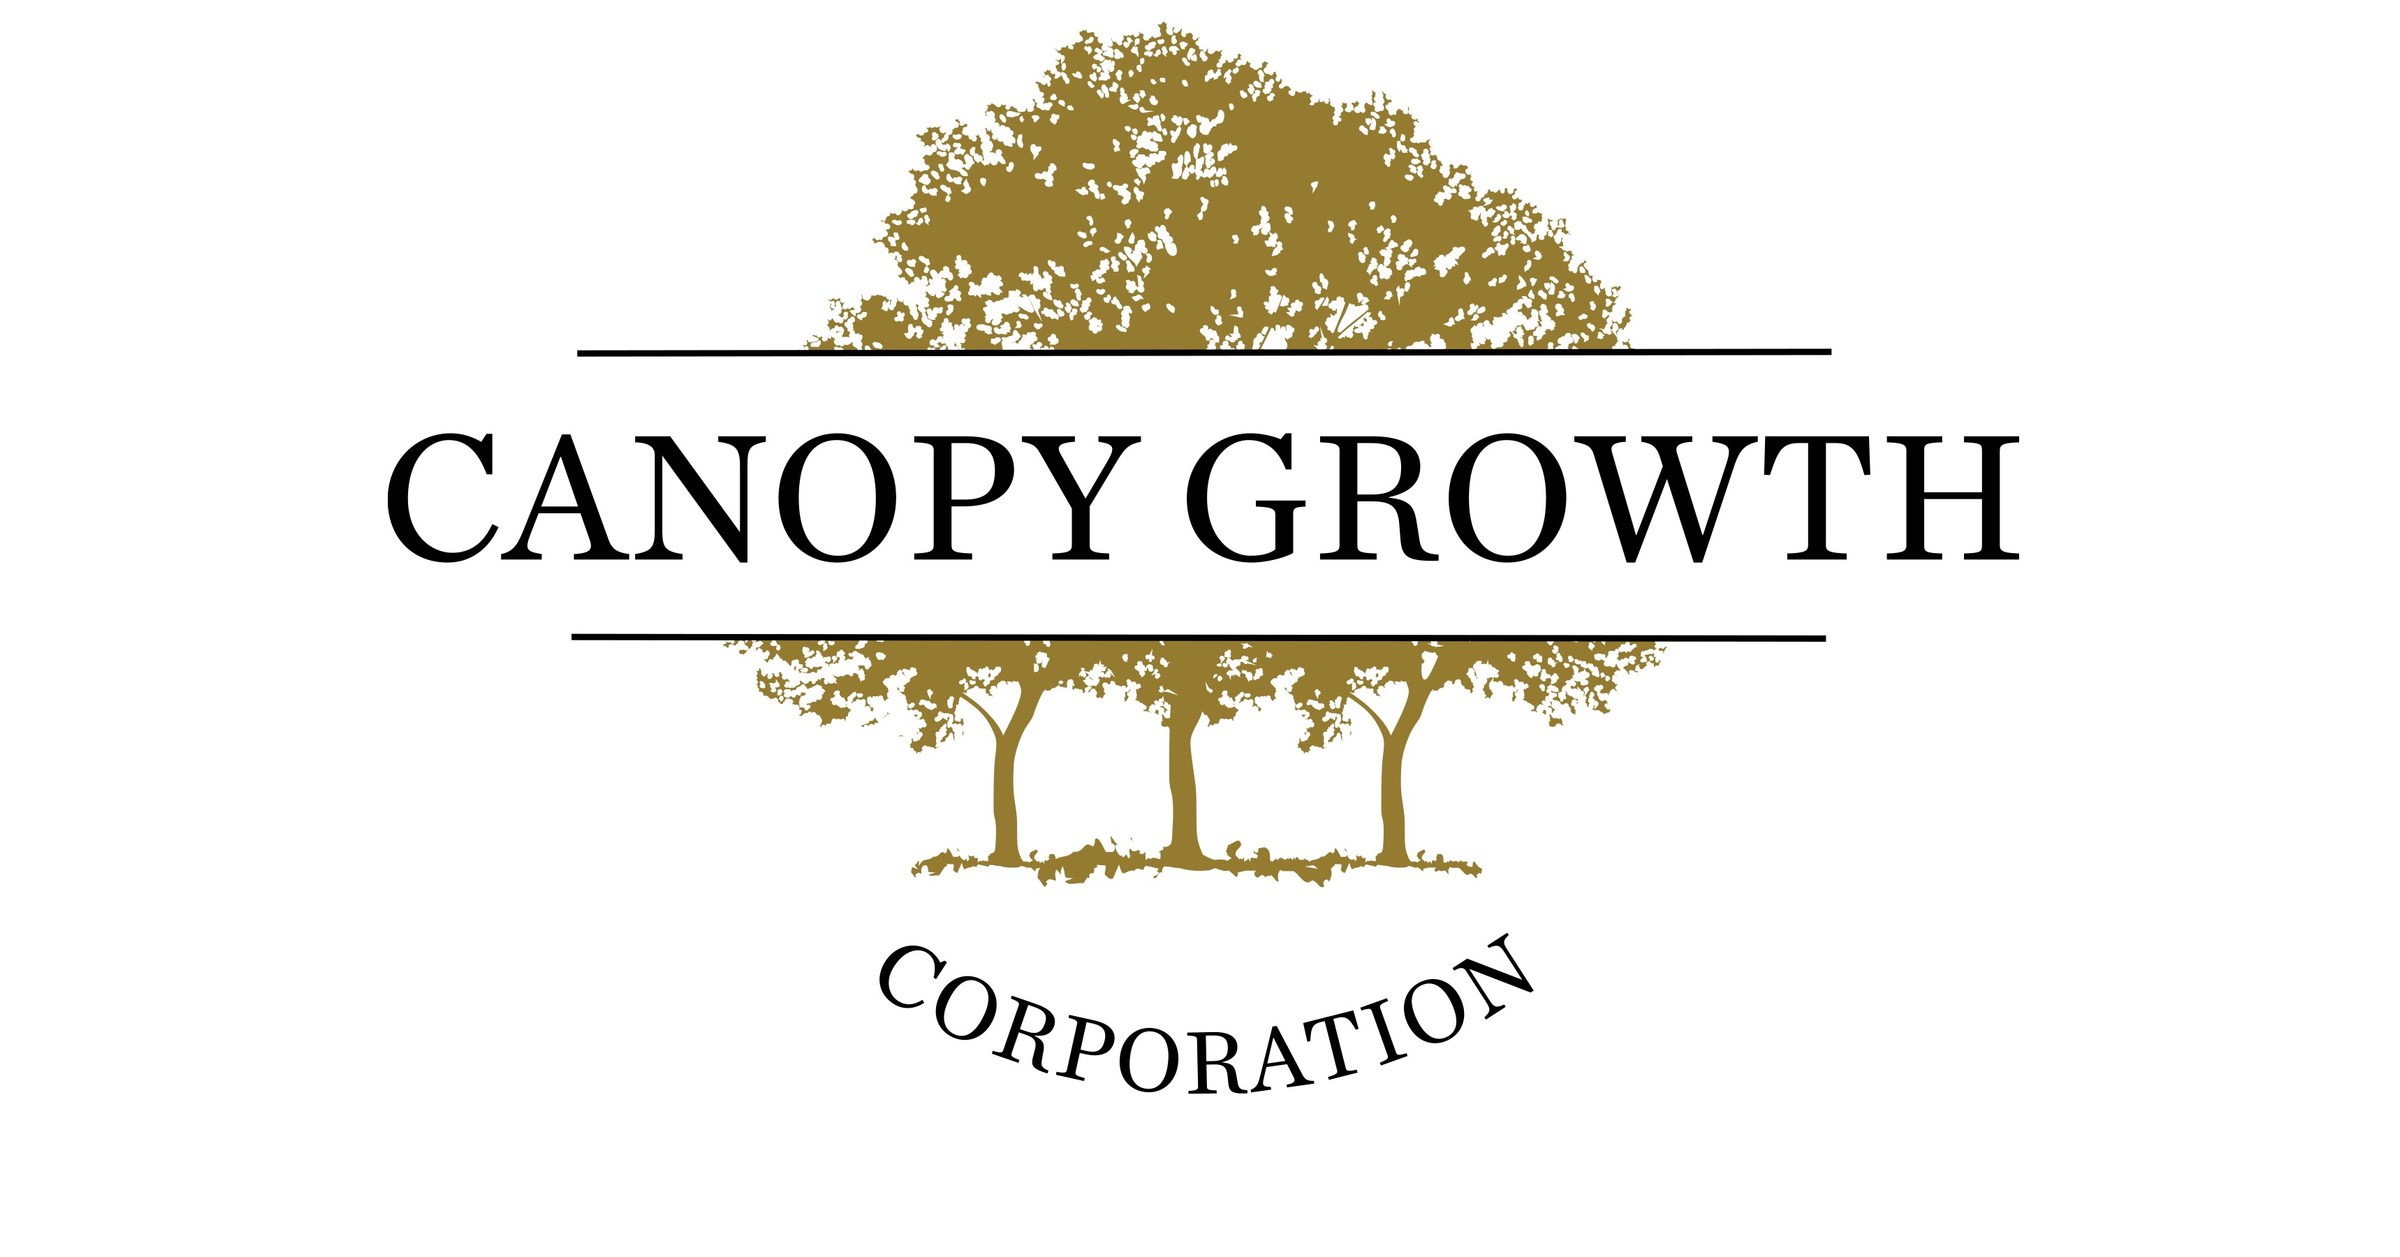 Large Canopy Growth Acquisition Moves Them Closer To US Markets